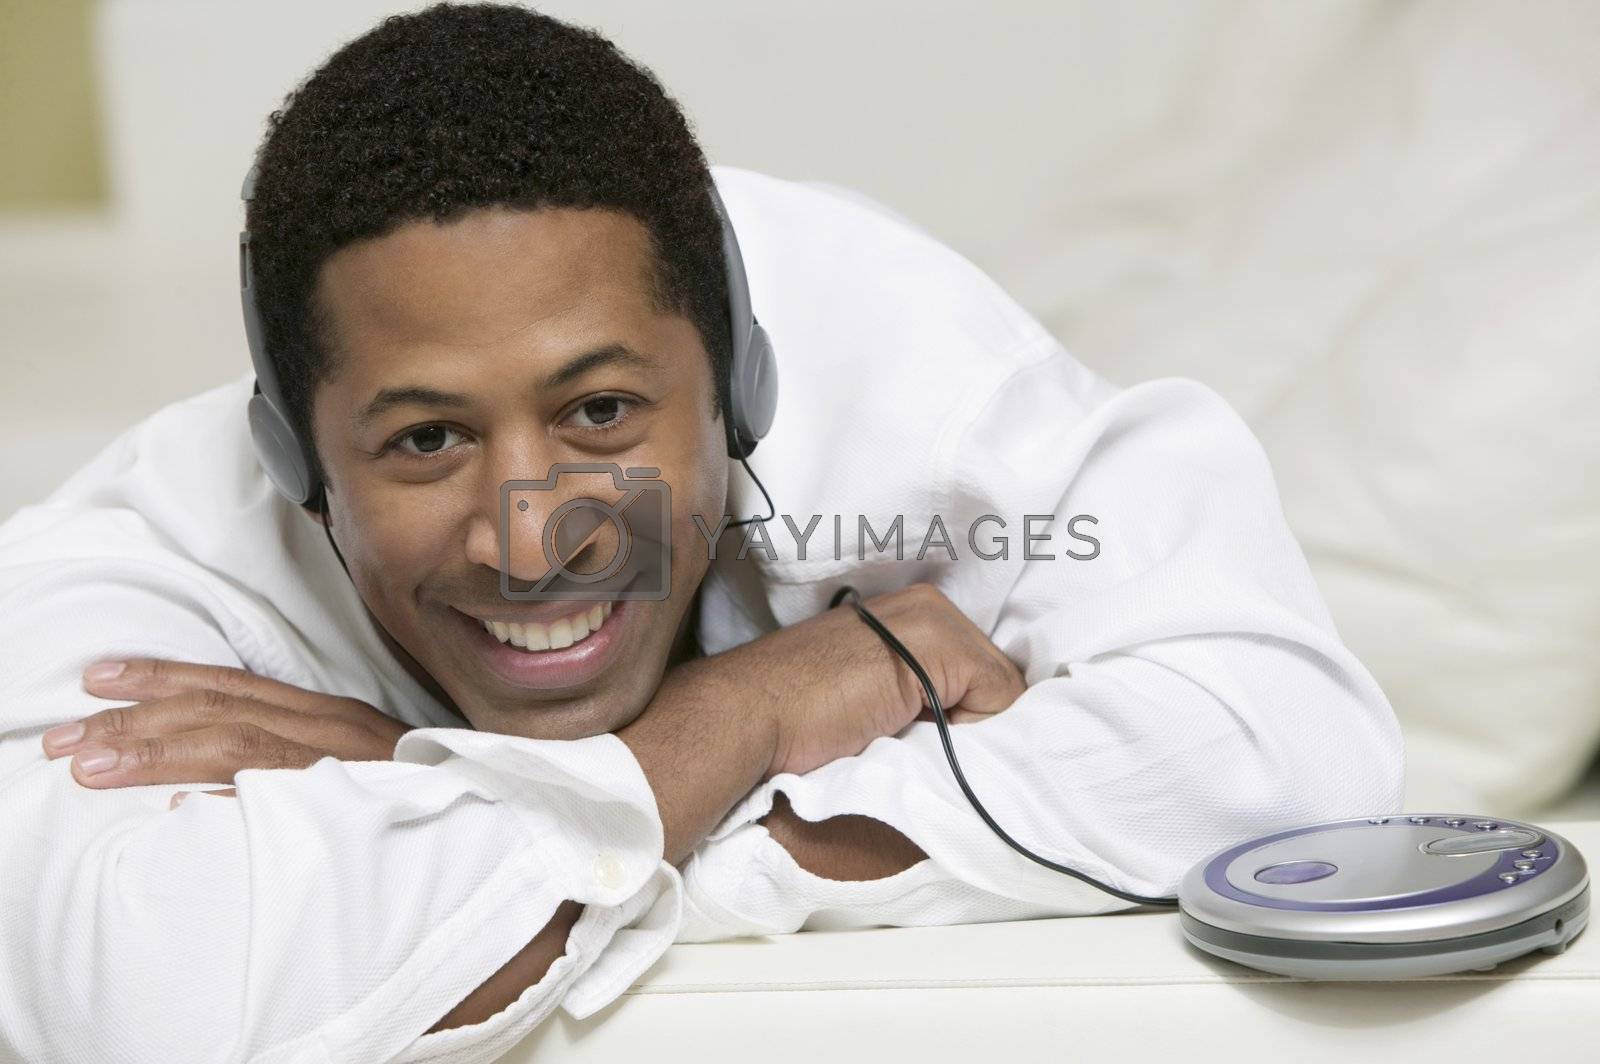 Royalty free image of Man Listening to Music on Headphones by moodboard